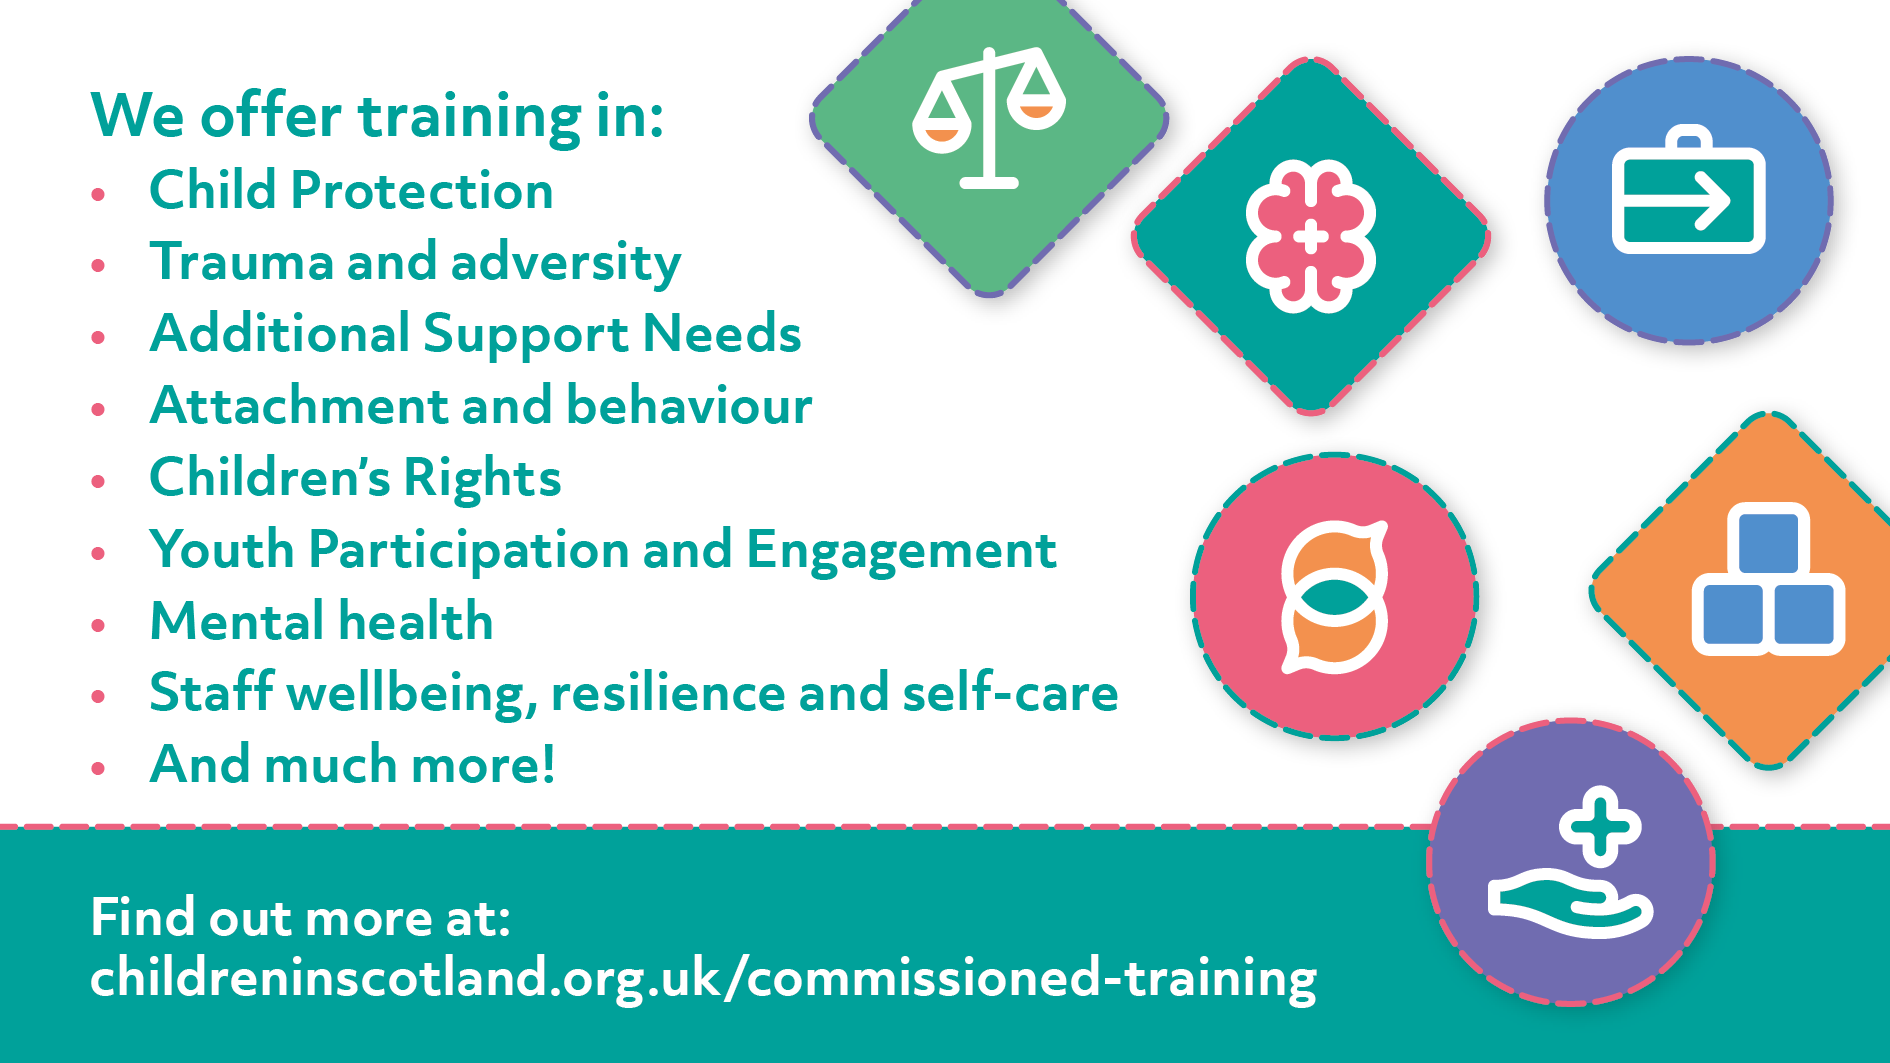 list of commissioned training topics offered: child protection, trauma and adversity, additional support needs, attachments & behaviour, Children's Rights, Participation & Engagement, mental health